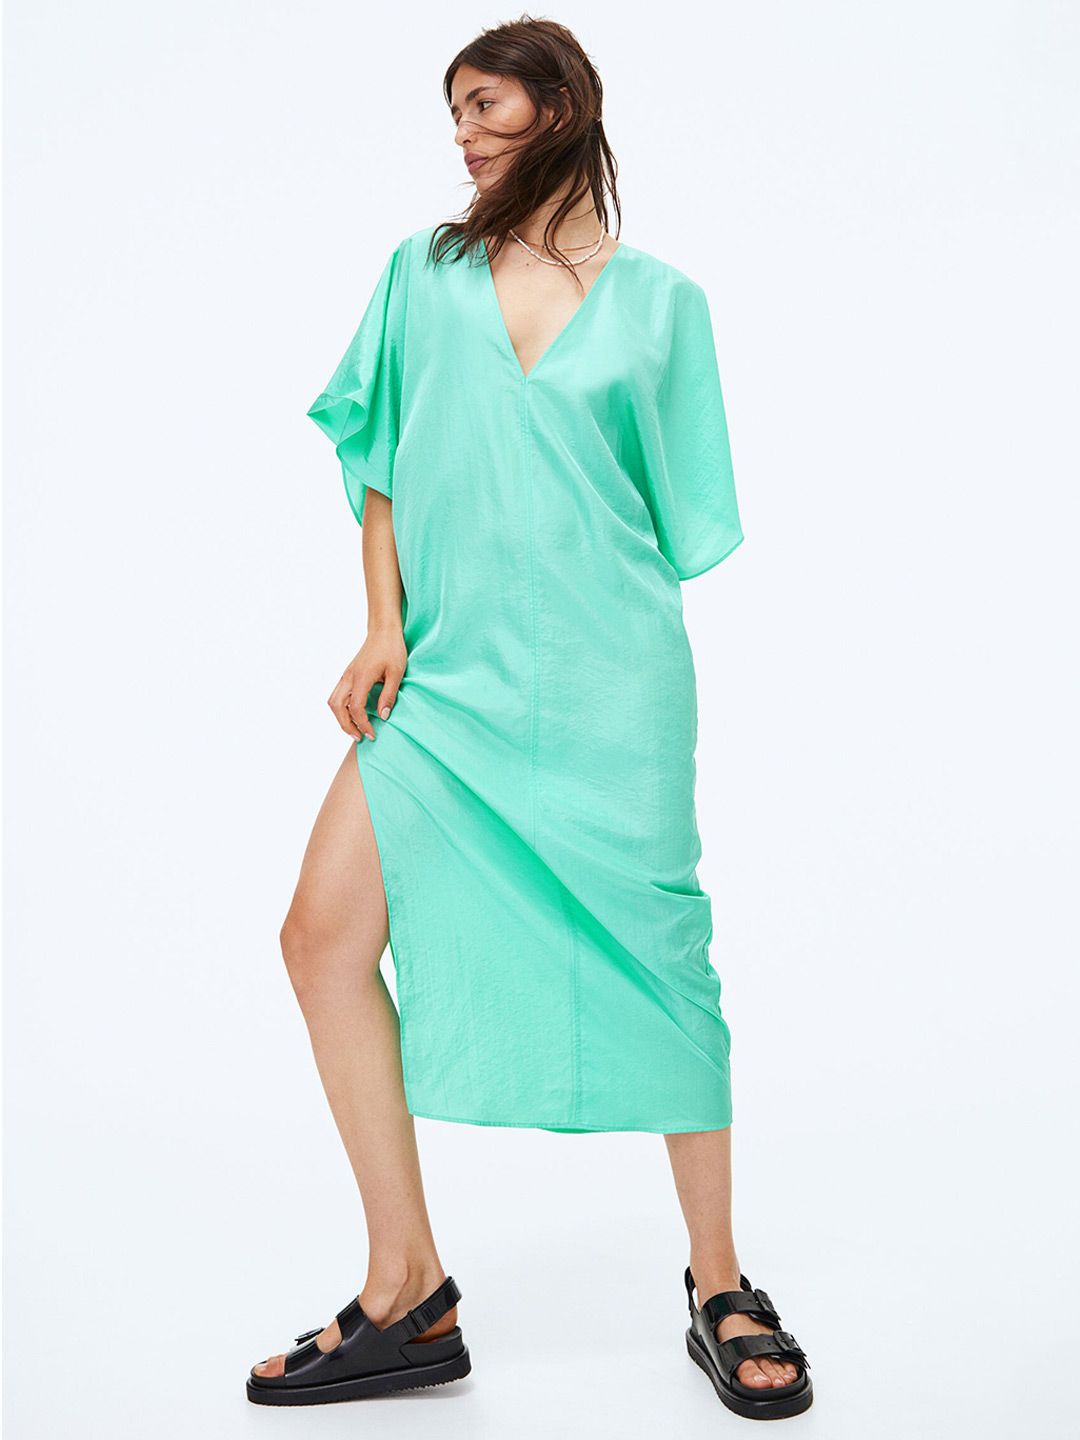 H&M Women Turquoise Blue Solid V-Neck Dress Price in India